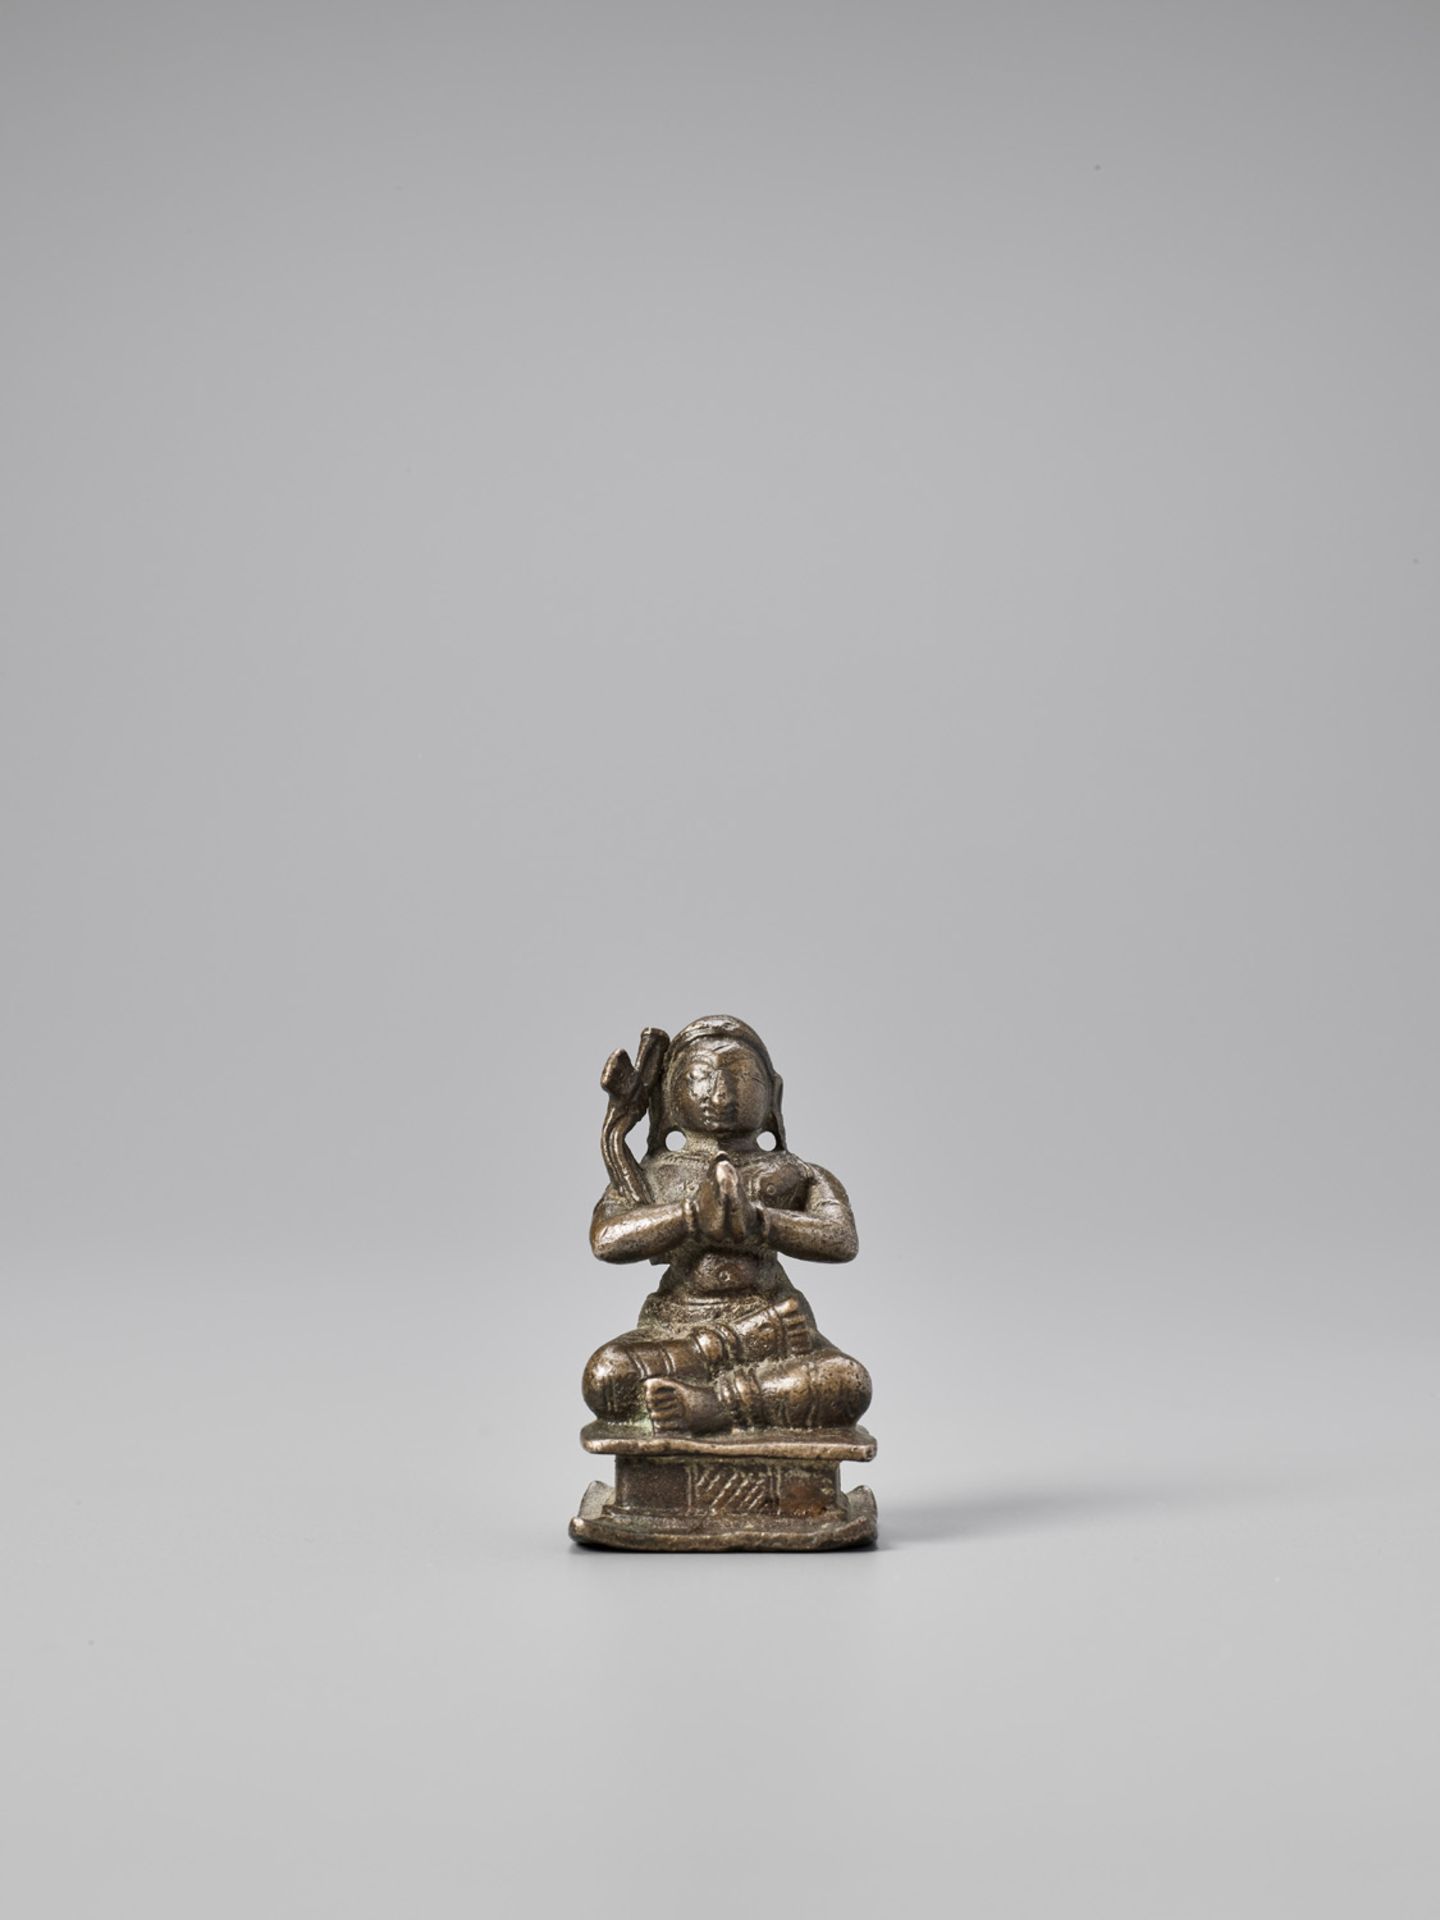 TWO SMALL INDIAN BRONZE FIGURES, 19TH CENTURY - Image 5 of 10